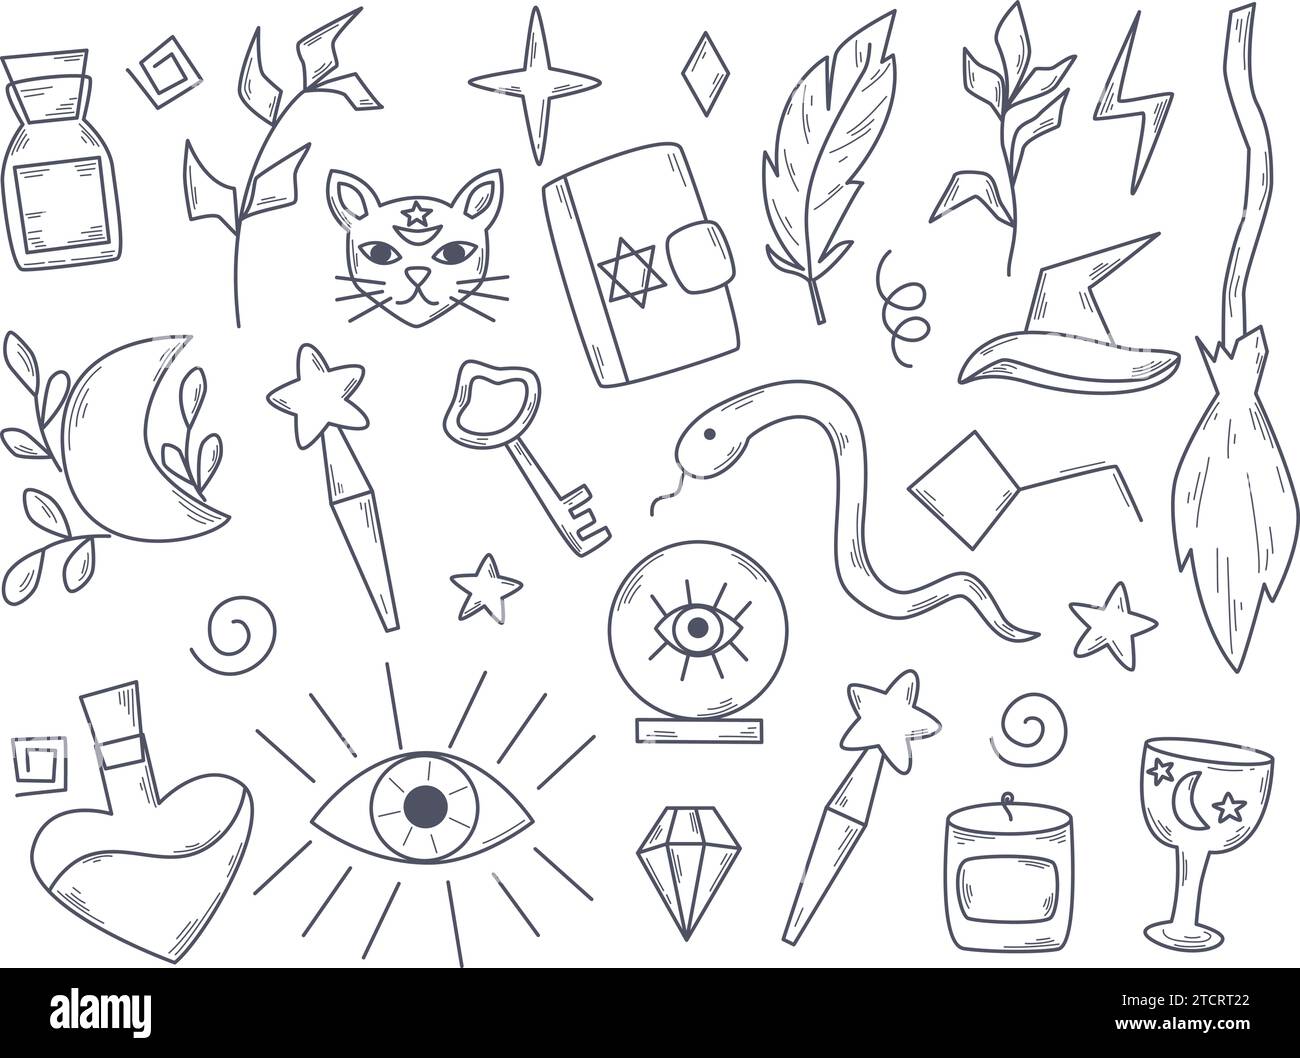 Magic set doodle sketch style Stock Vector